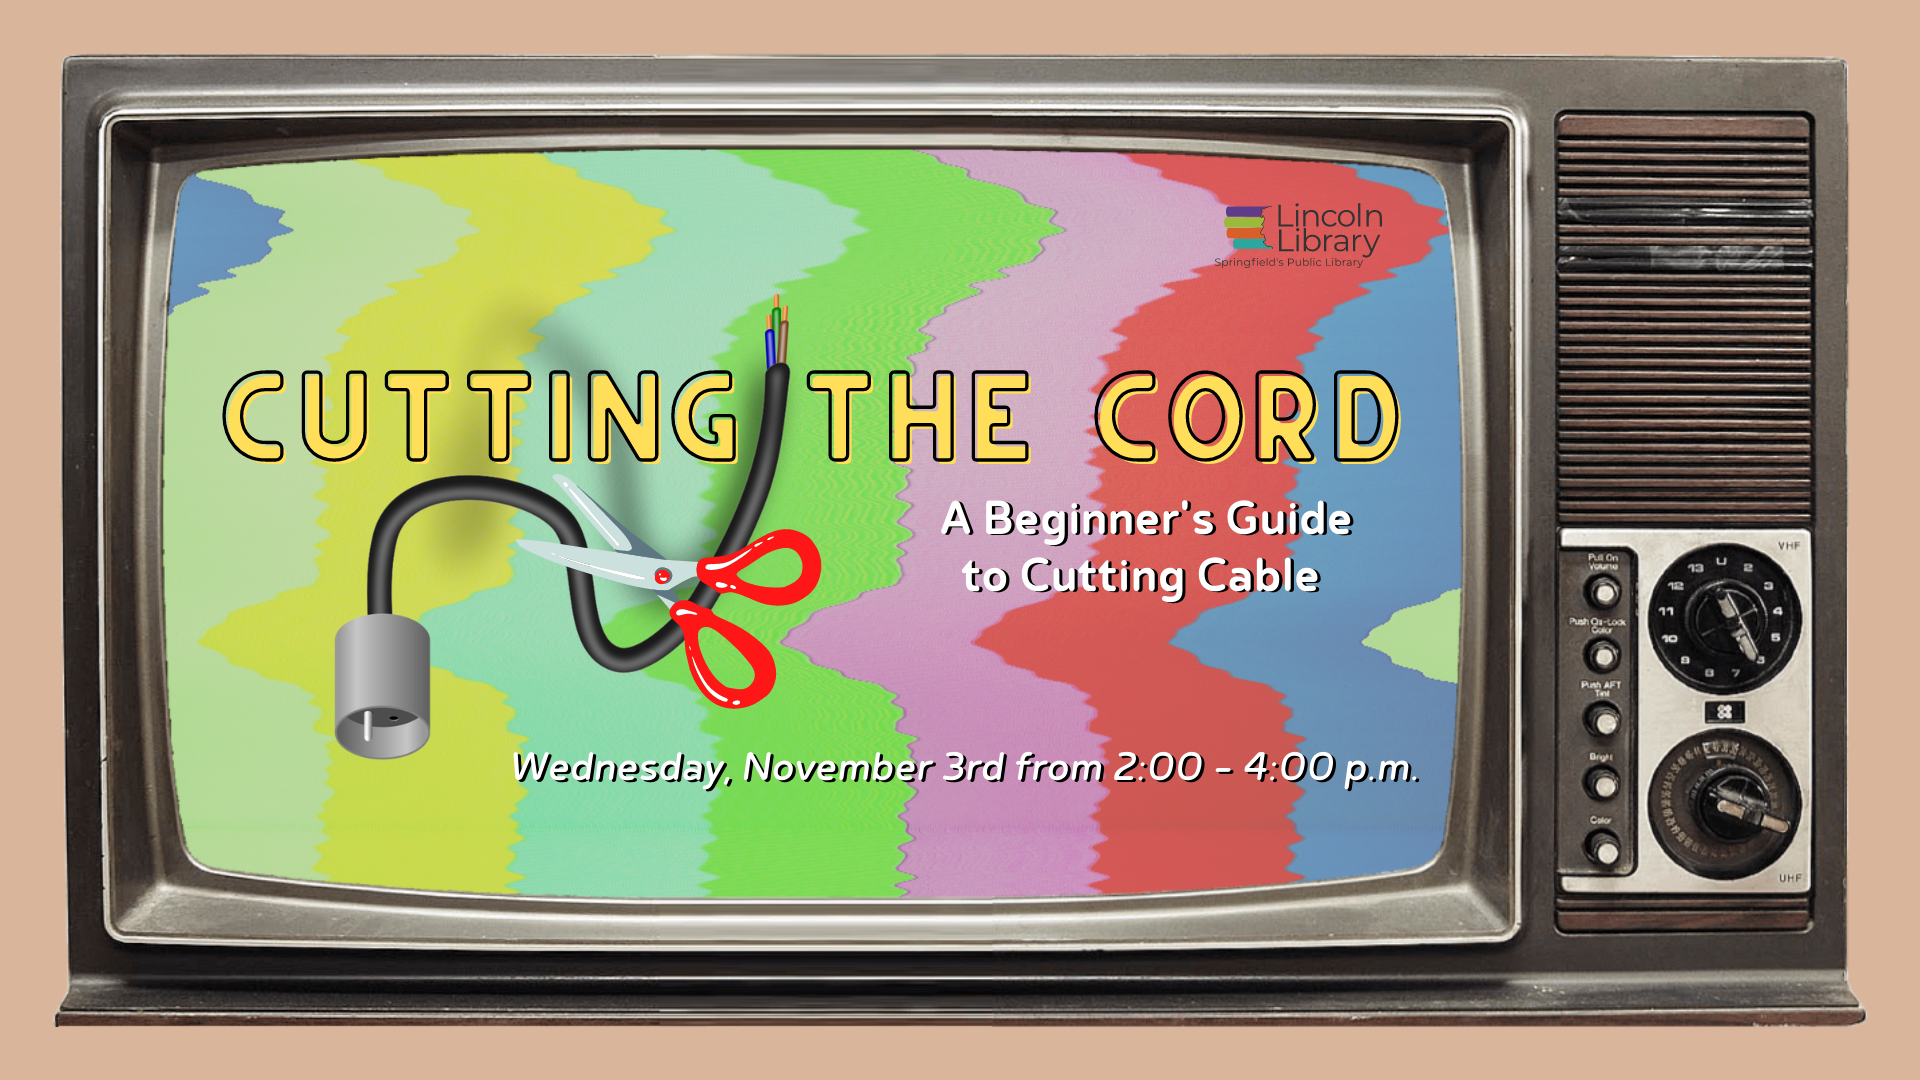 Advertisement for program "Cutting the Cord: A Beginner's Guide to Cutting Cable" to be held on Wednesday, November 3rd from 2:00 to 4:00 p.m.